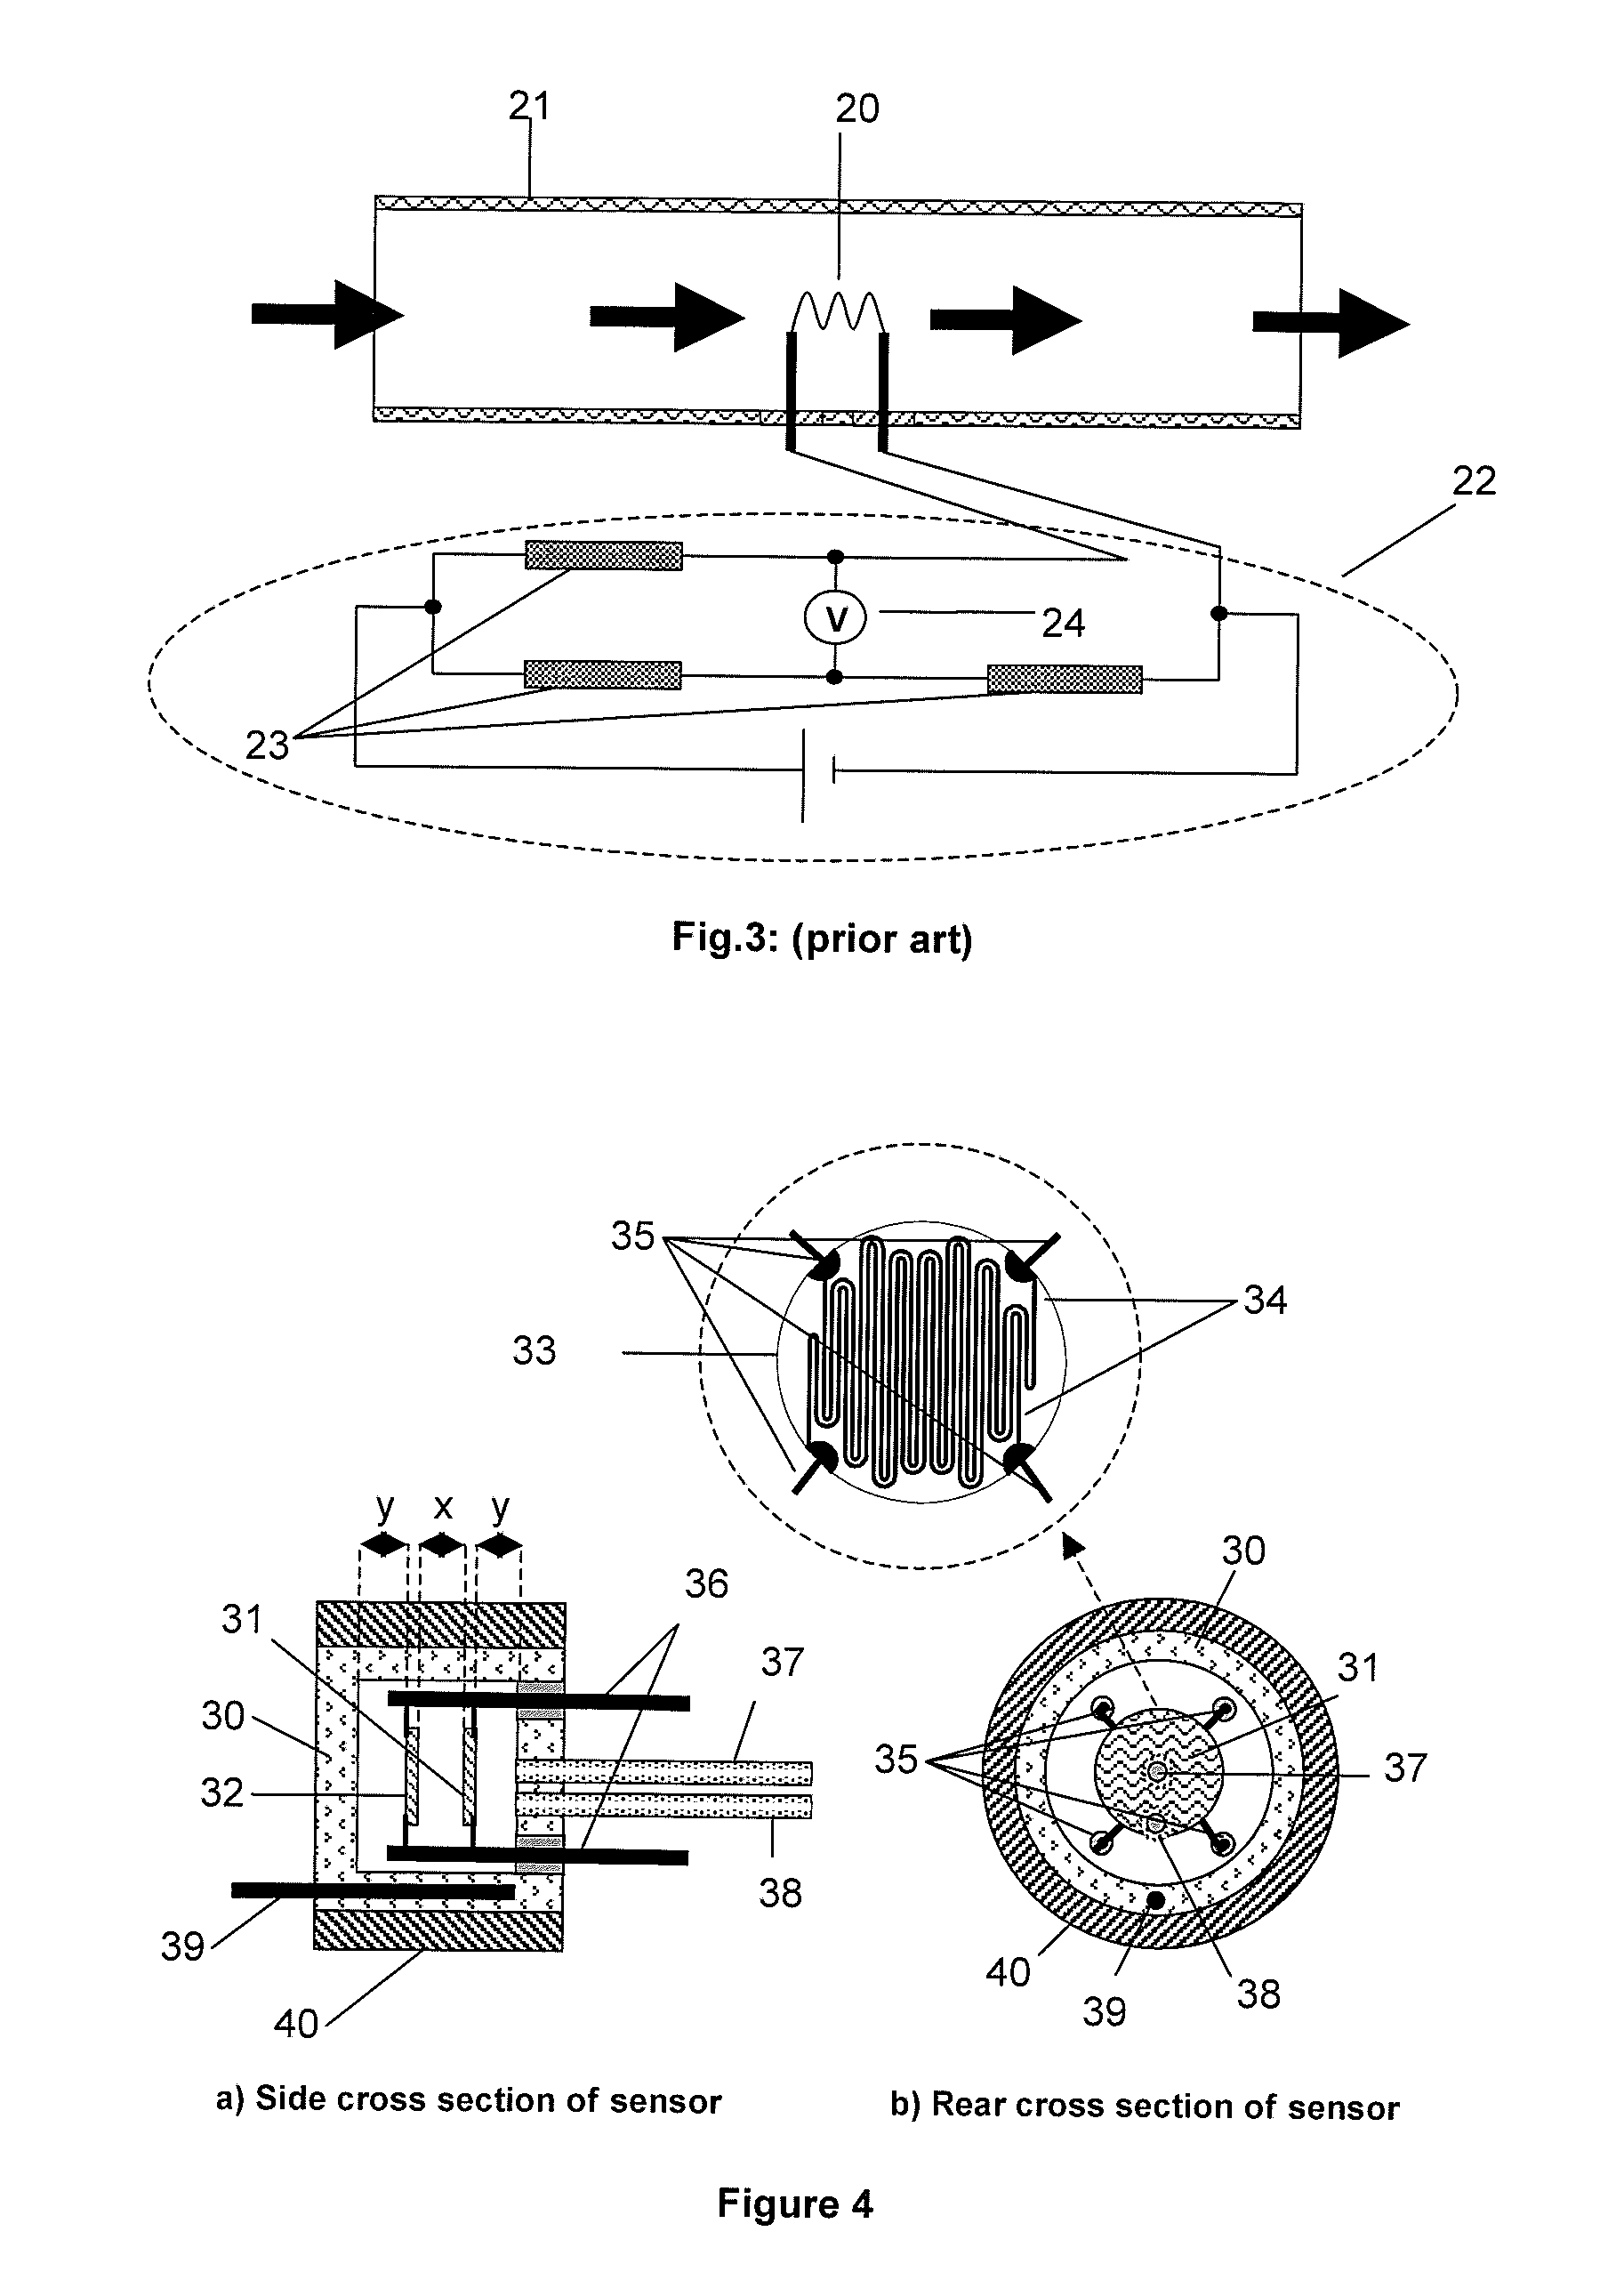 Apparatus for measuring the flow rate of a fluid